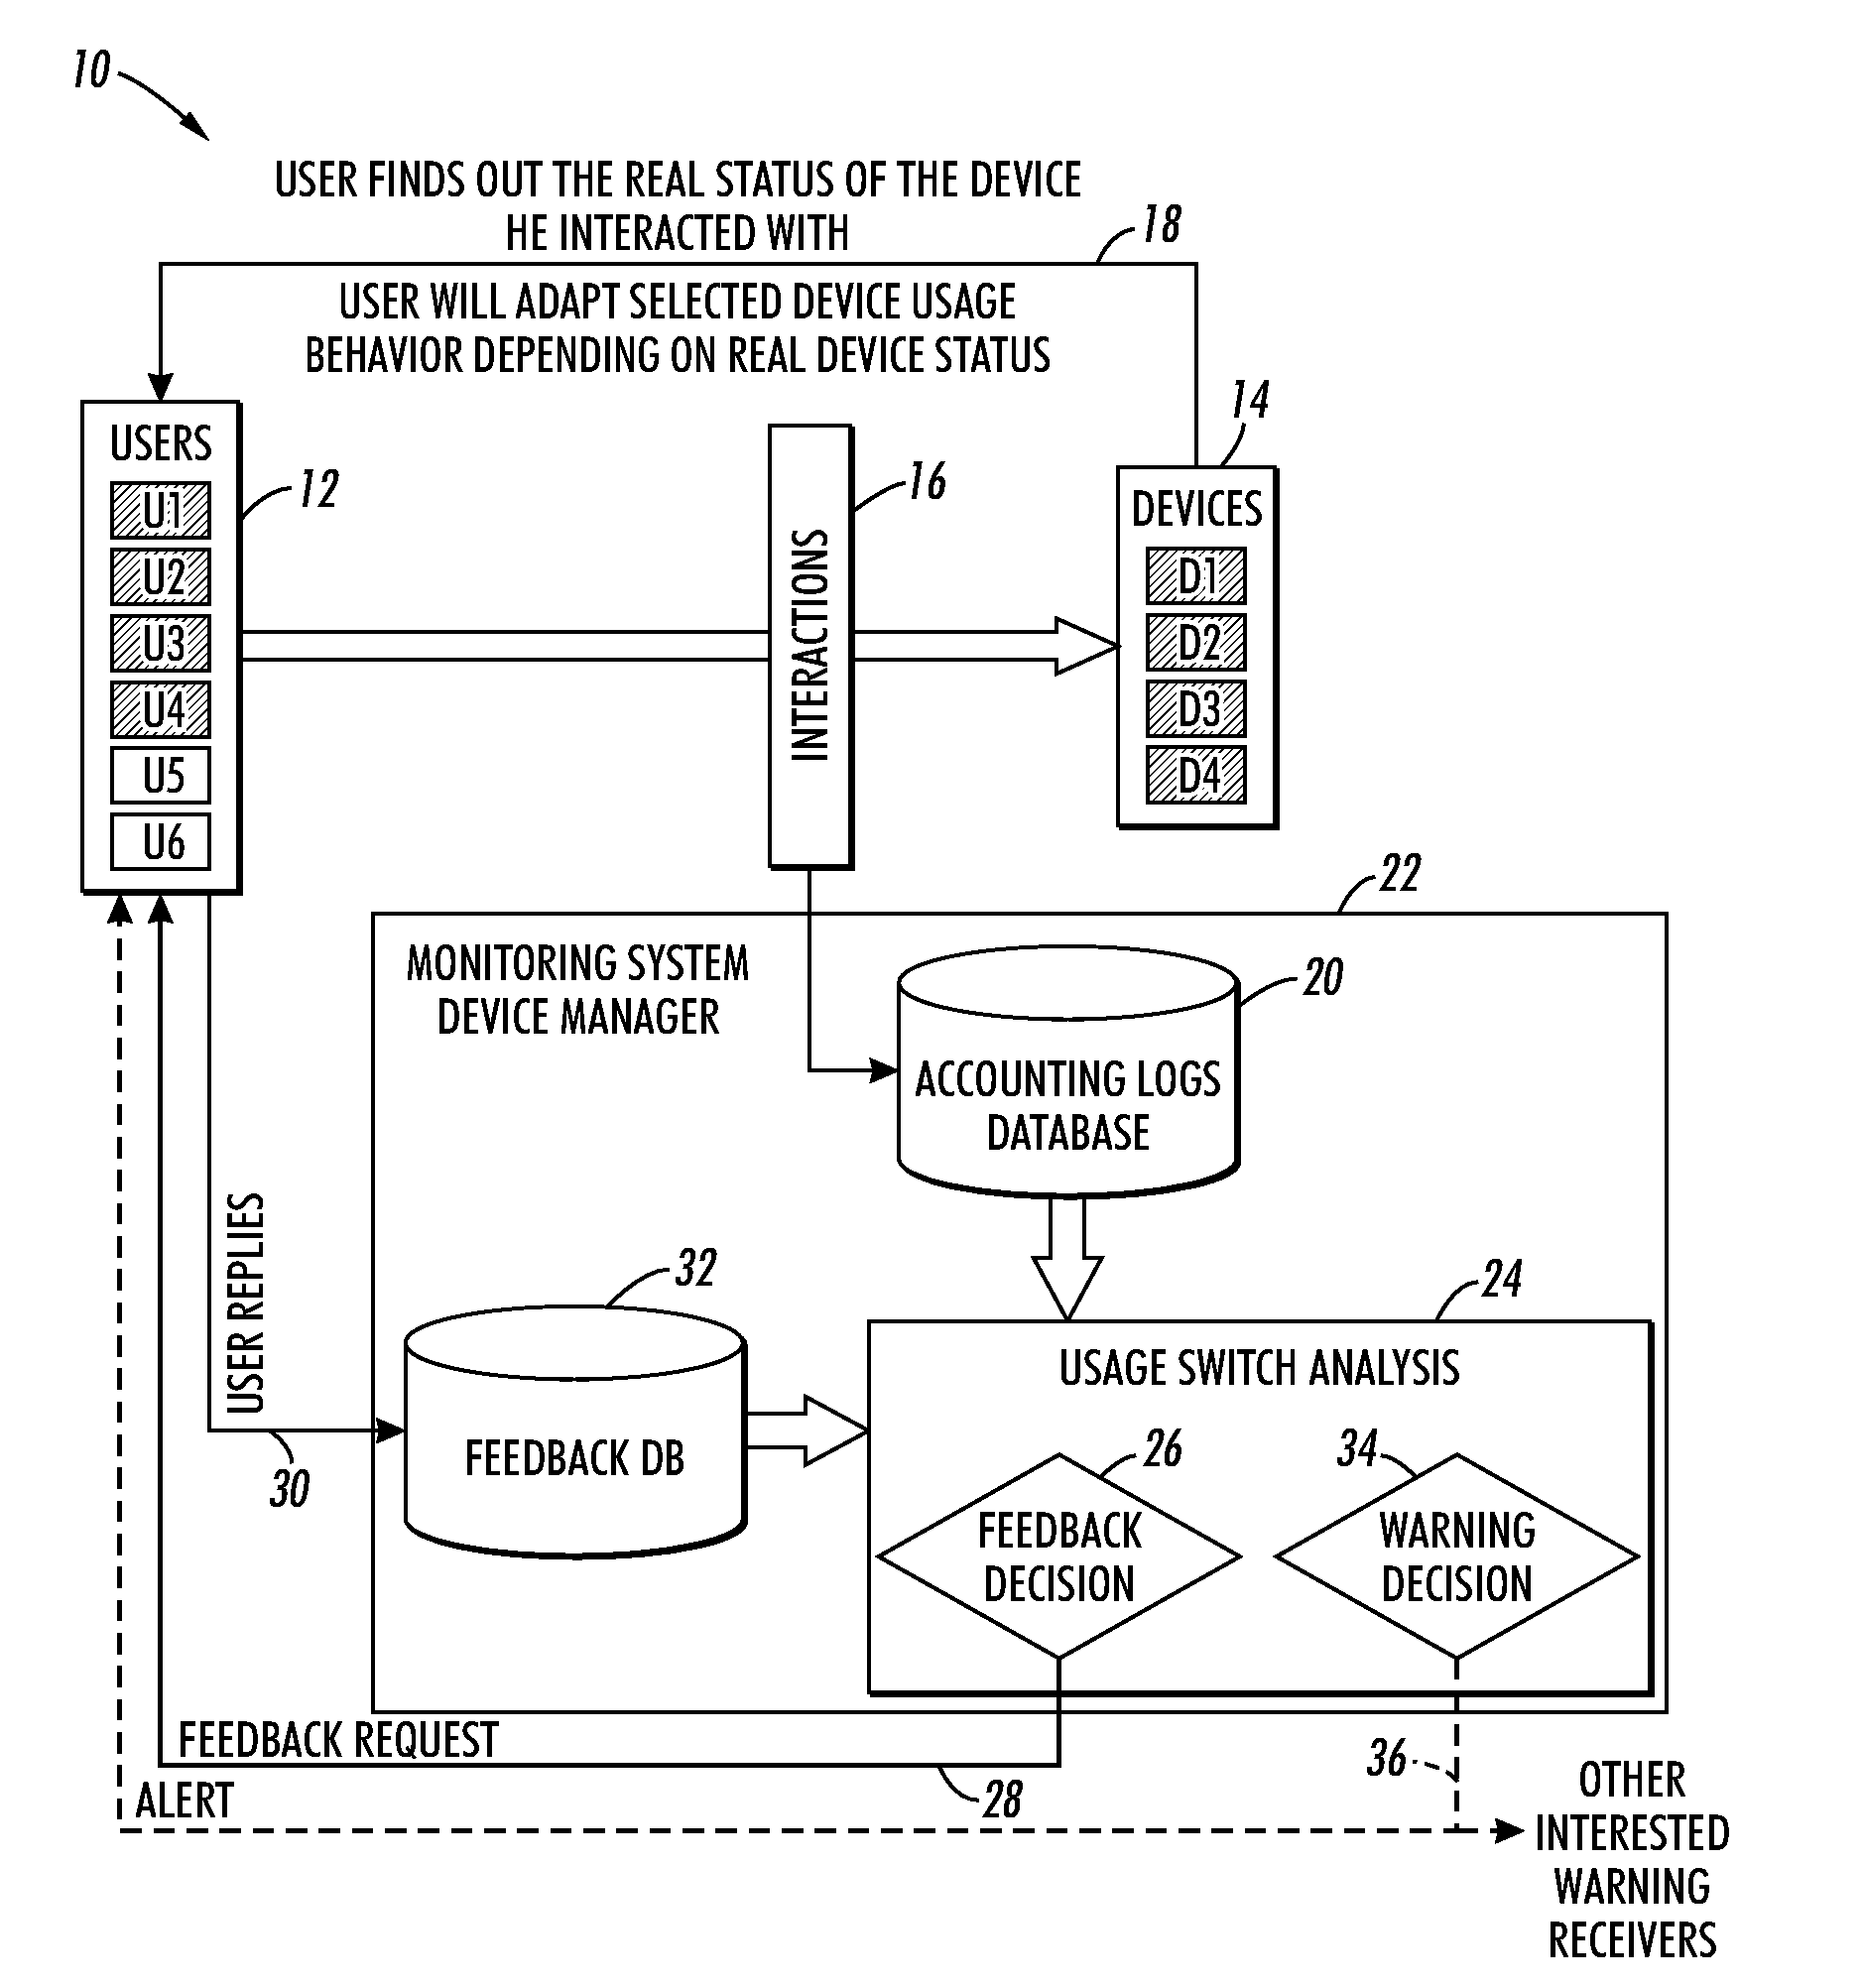 System and method for improving failure detection using collective intelligence with end-user feedback